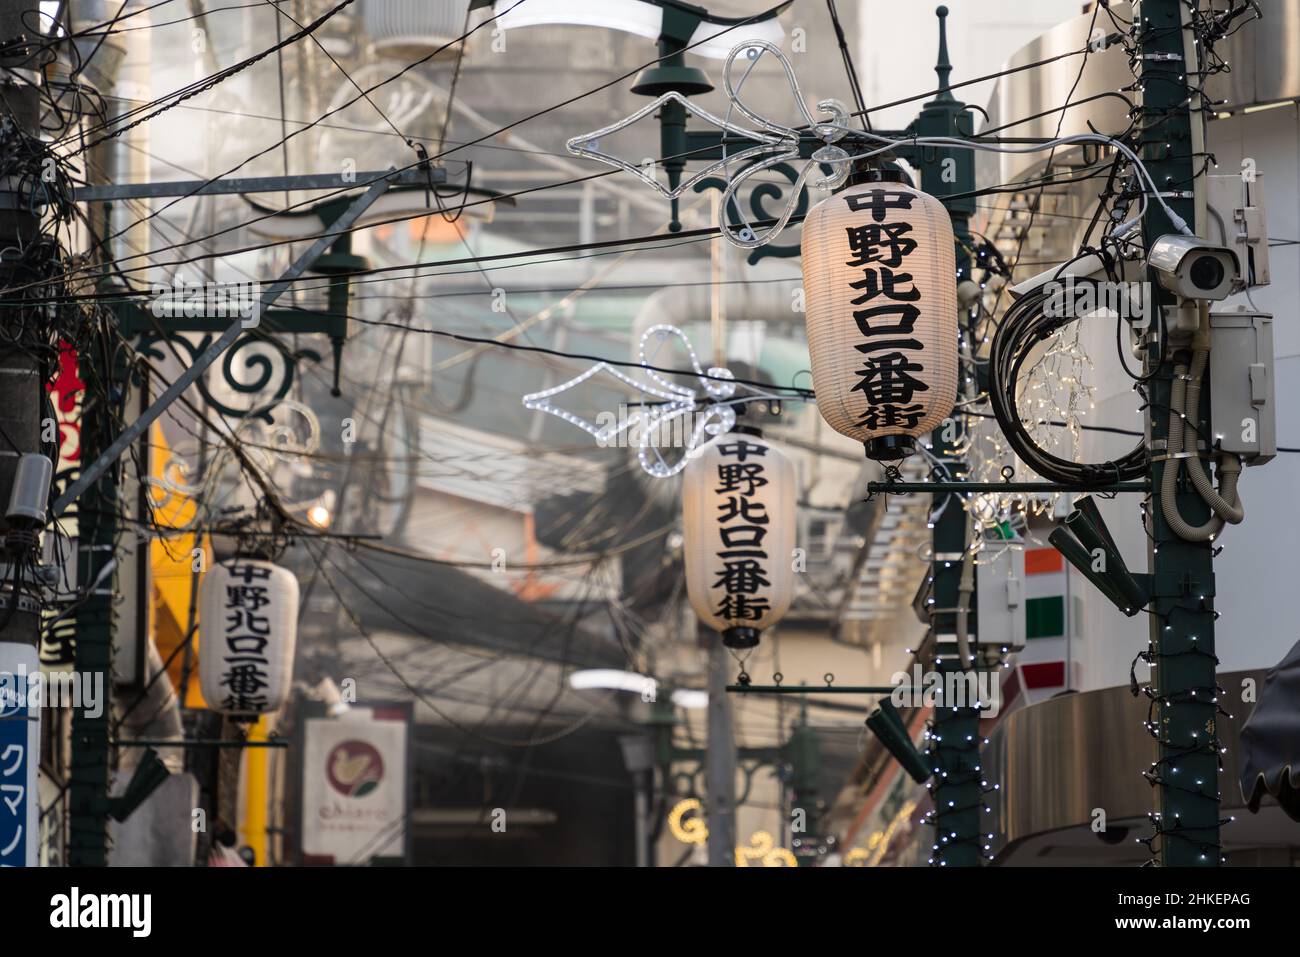 Electricity wires and poles in Tokyo, Japan Stock Photo